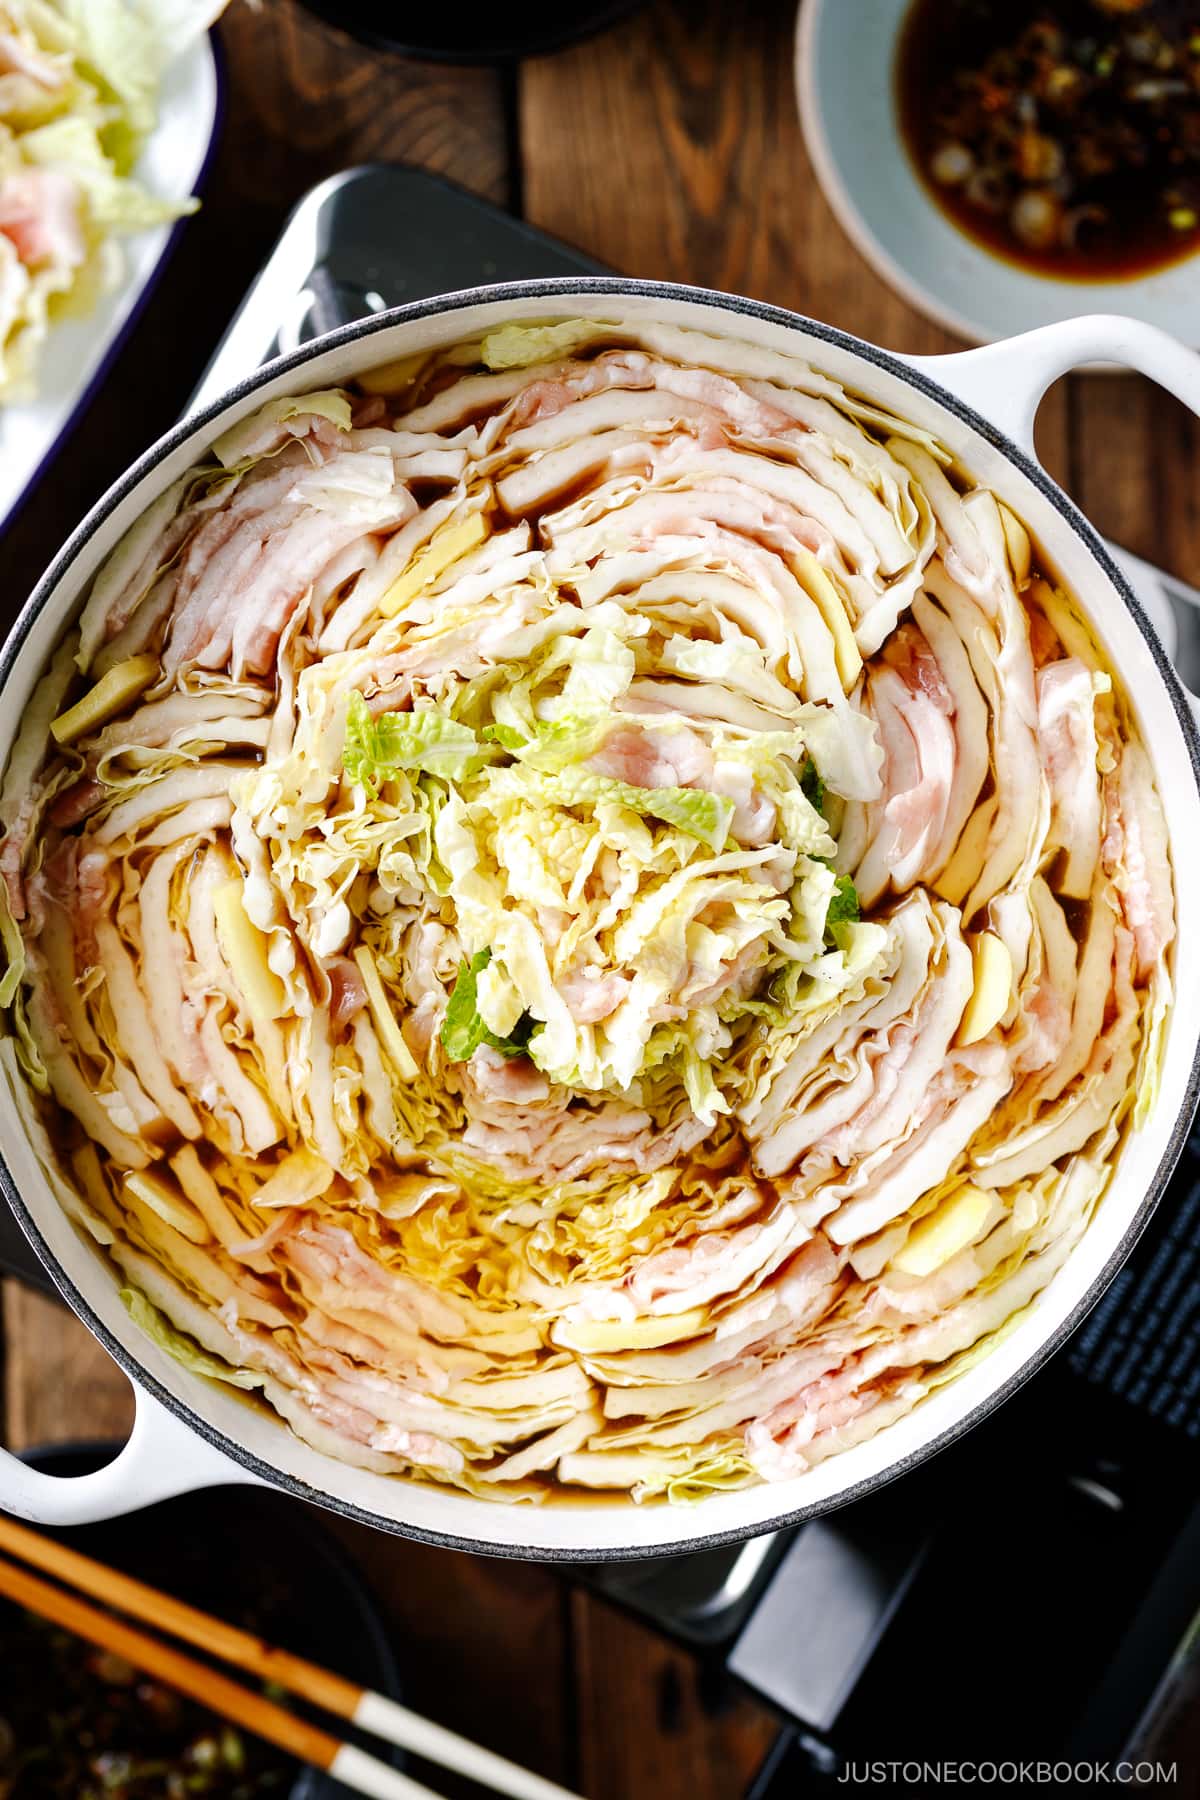 A Le Creuset pot containing Mille-Feuille Nabe, which is a hot pot dish with layers of pork belly slices and napa cabbage slices in a dashi broth.